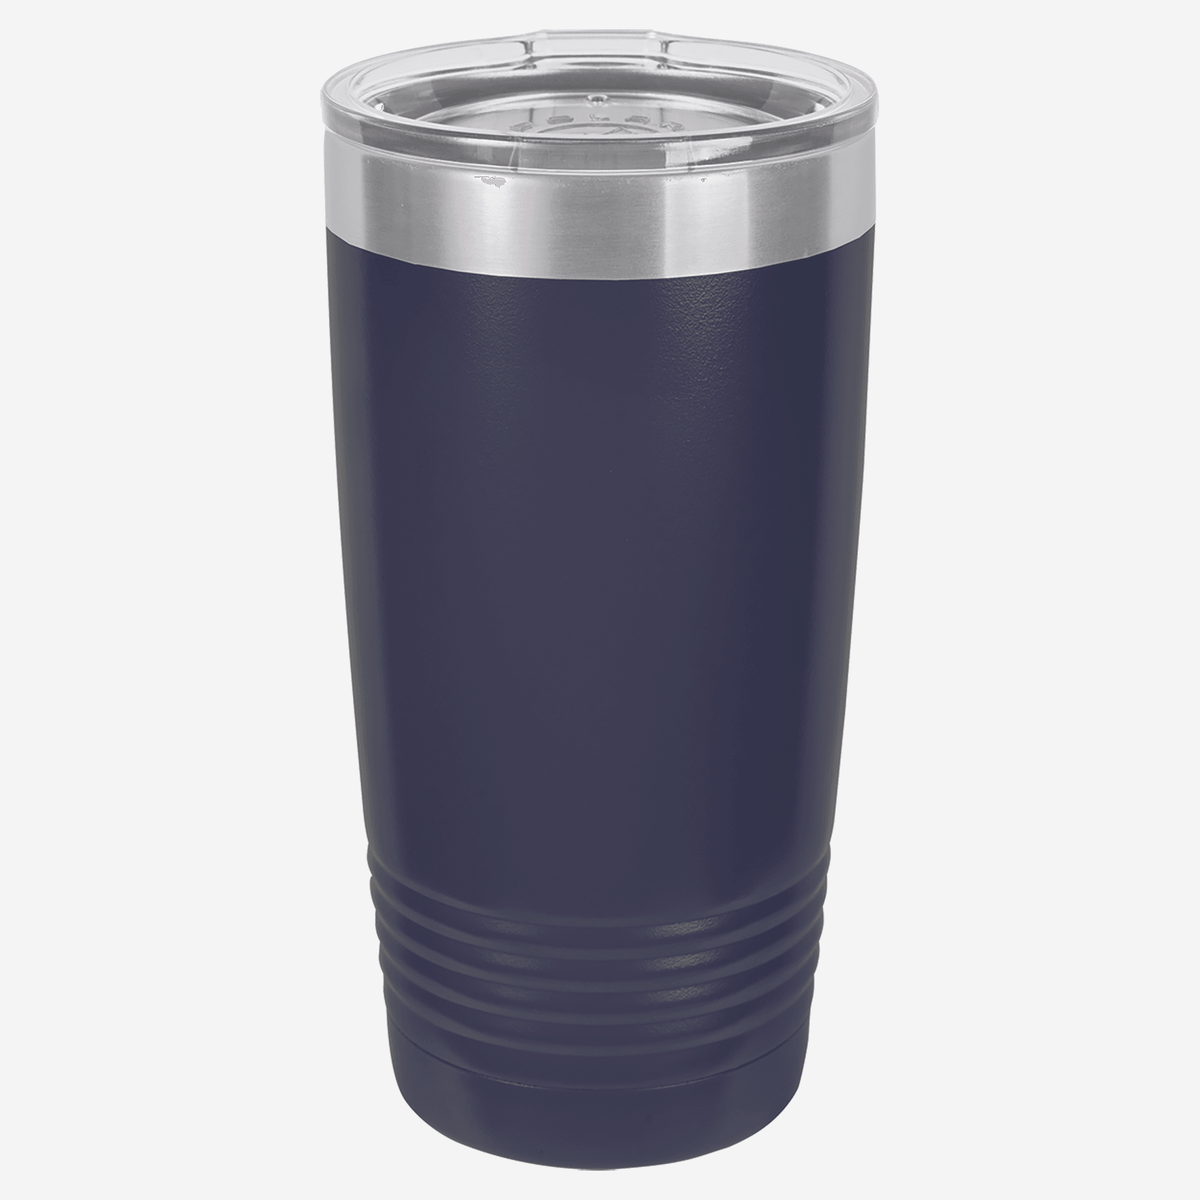 20 oz. navy blue stainless steel tumbler with lid grip rings on the bottom